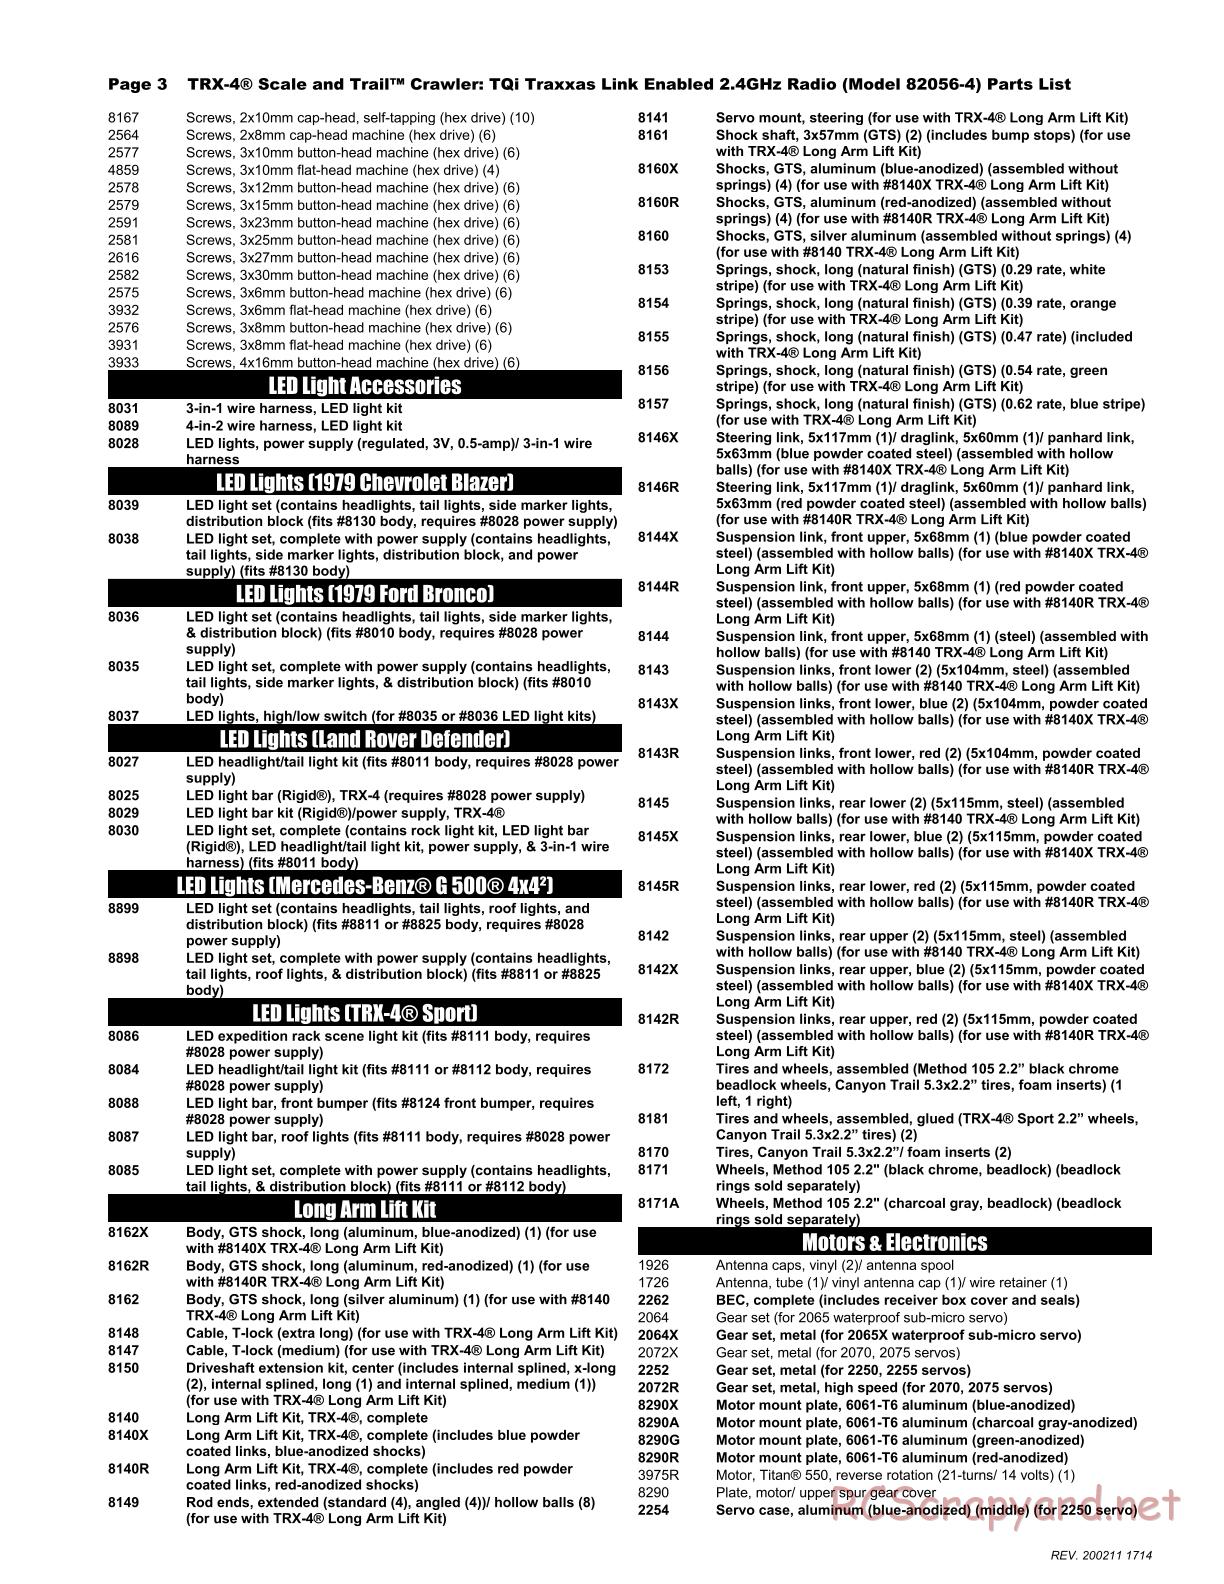 Traxxas - TRX-4 Land Rover Defender - Parts List - Page 3